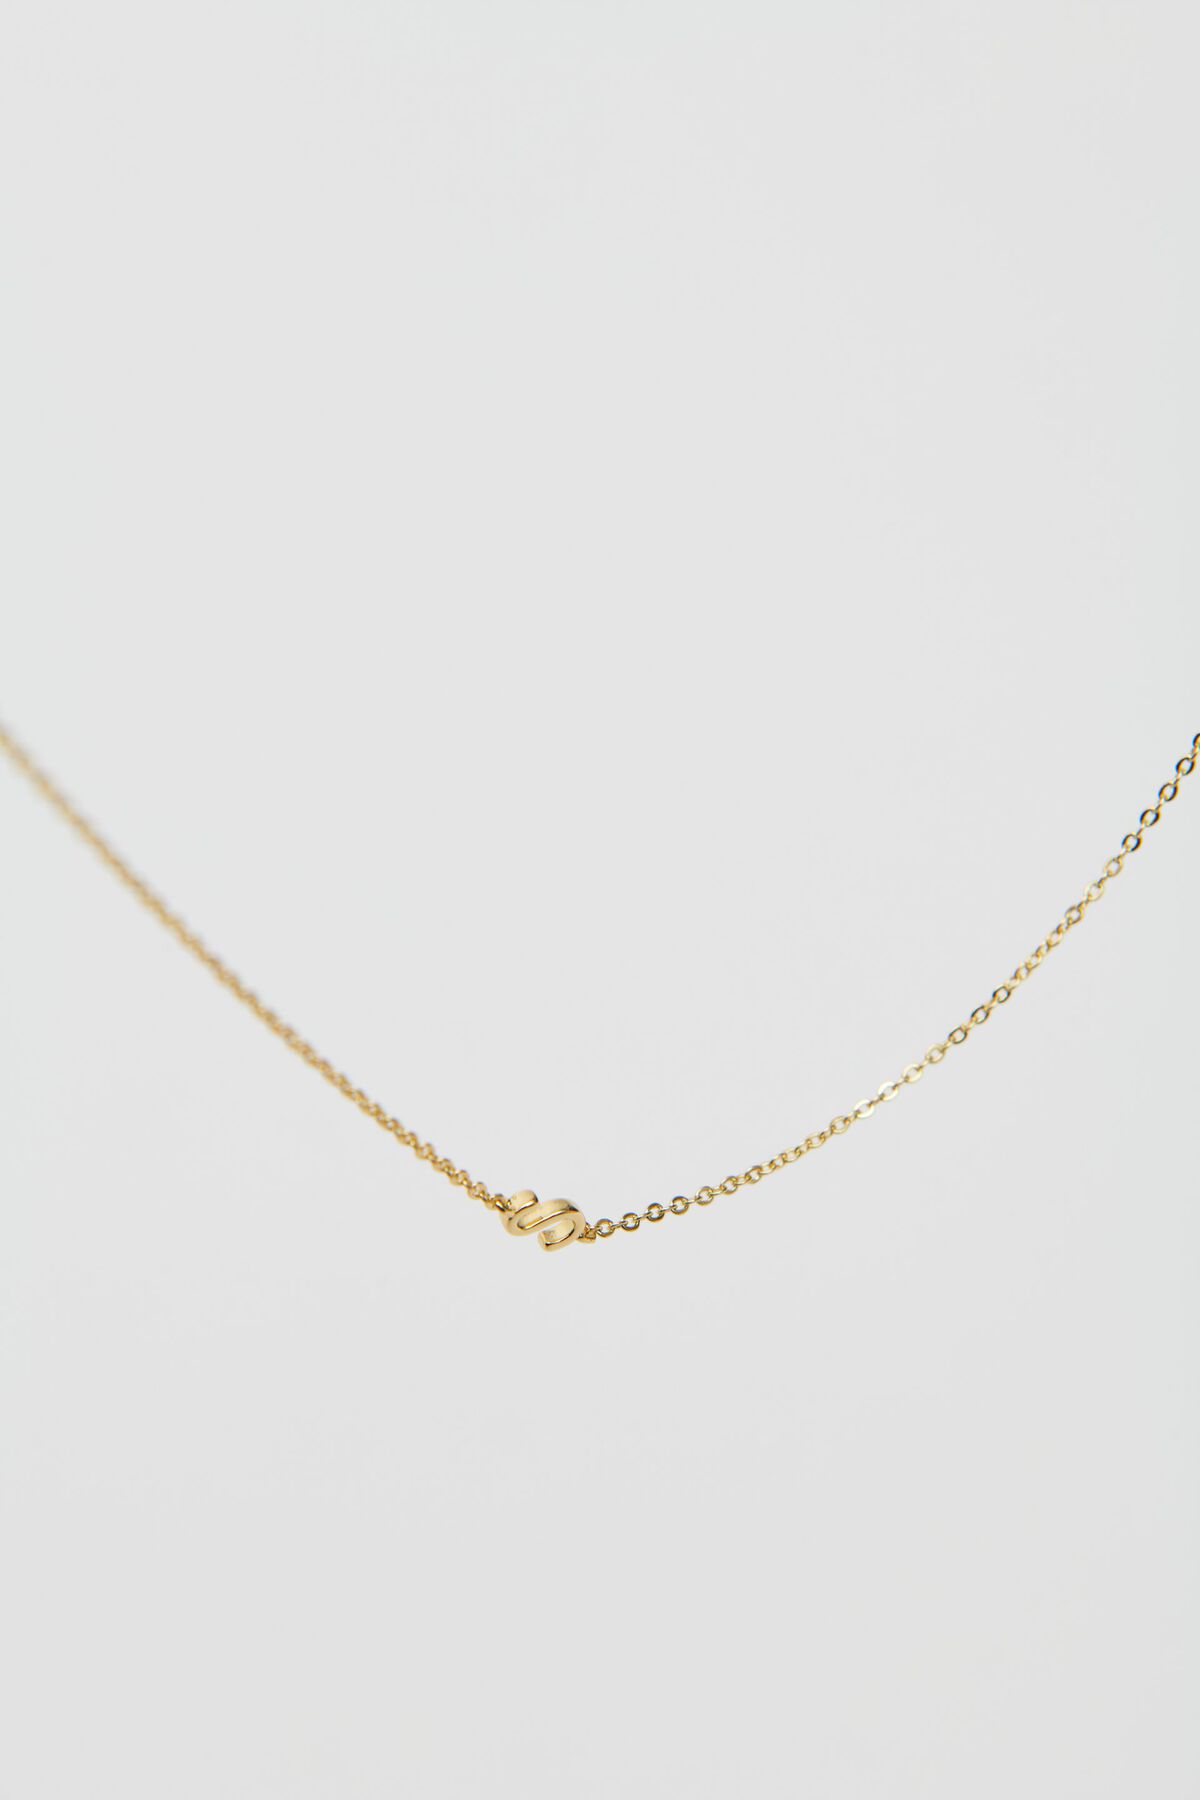 Garage 14K Gold Plated Initial Necklace. 3